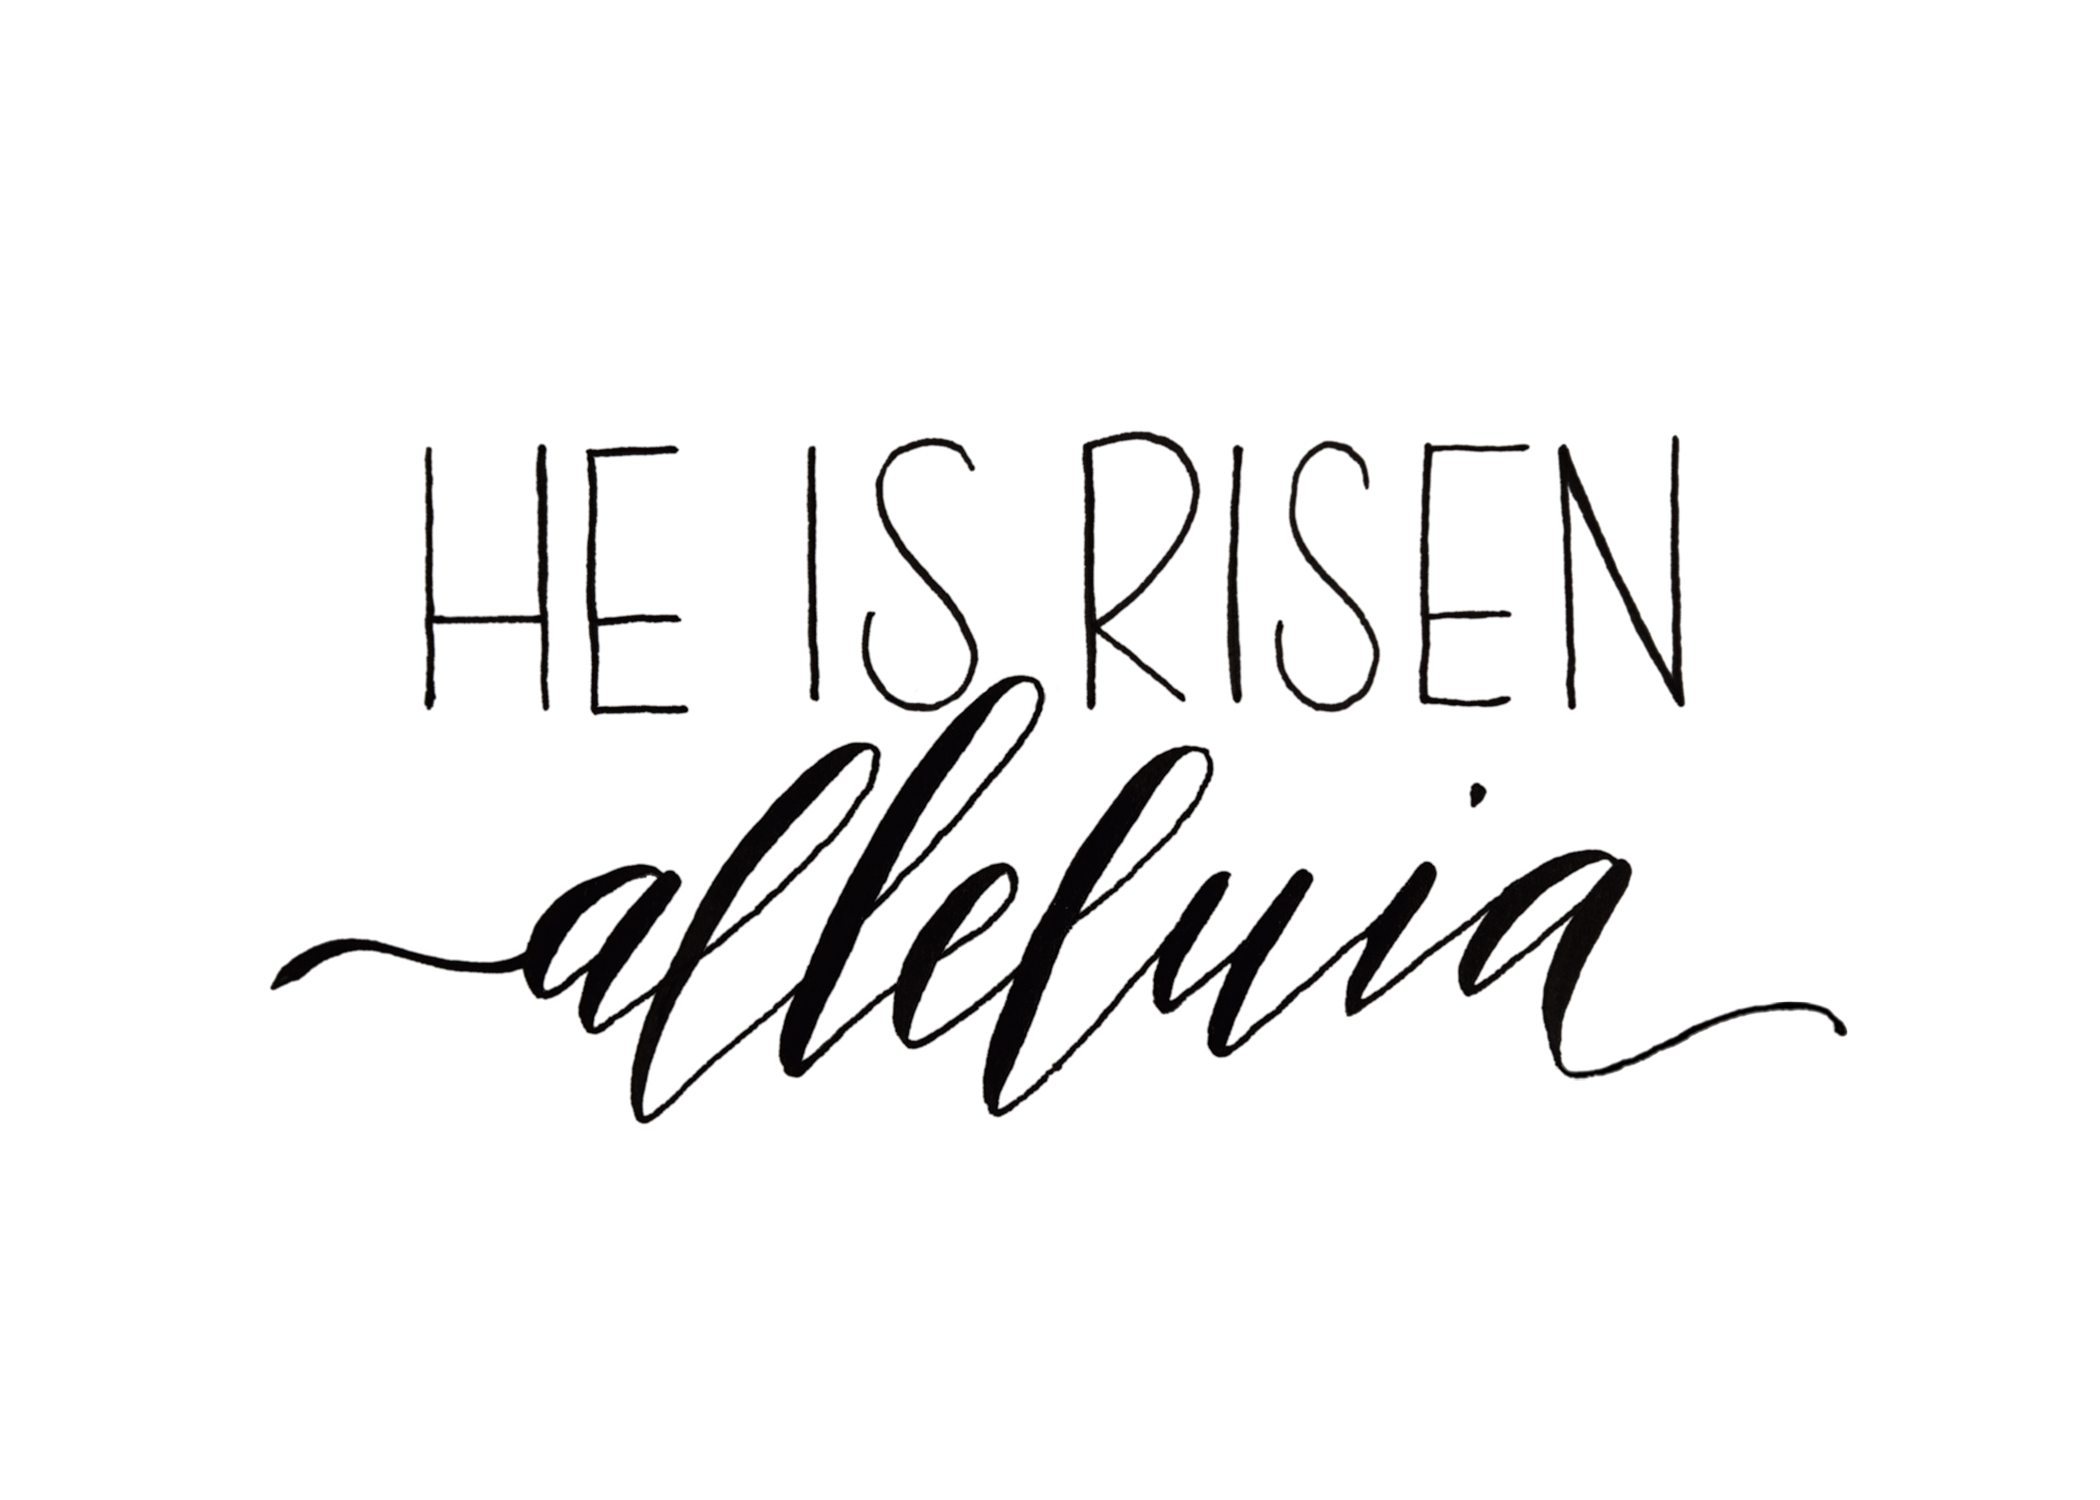 empty tomb clipart black and white